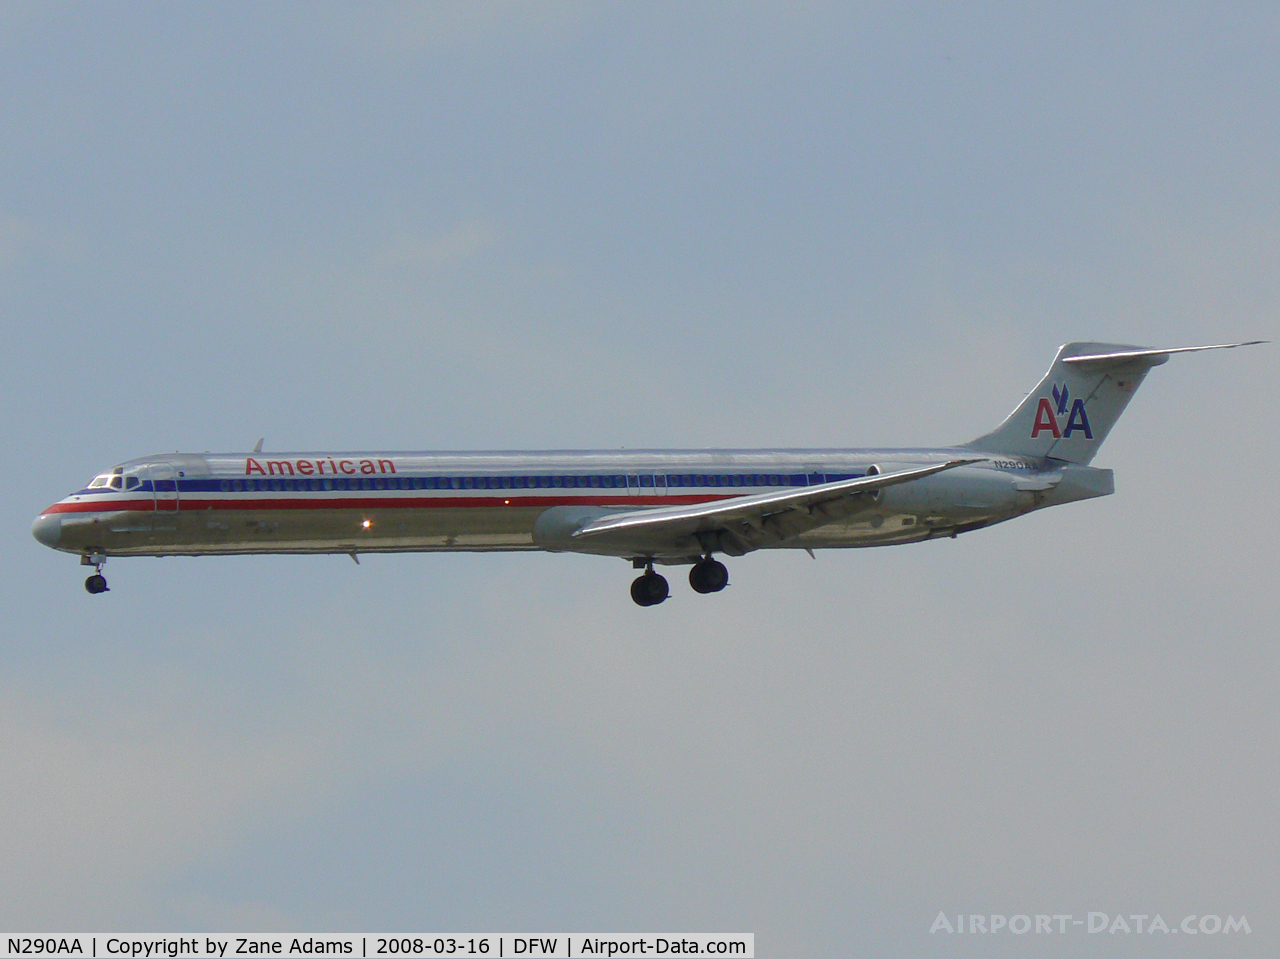 N290AA, 1985 McDonnell Douglas MD-82 (DC-9-82) C/N 49302, American Airlines Landing 18R at DFW